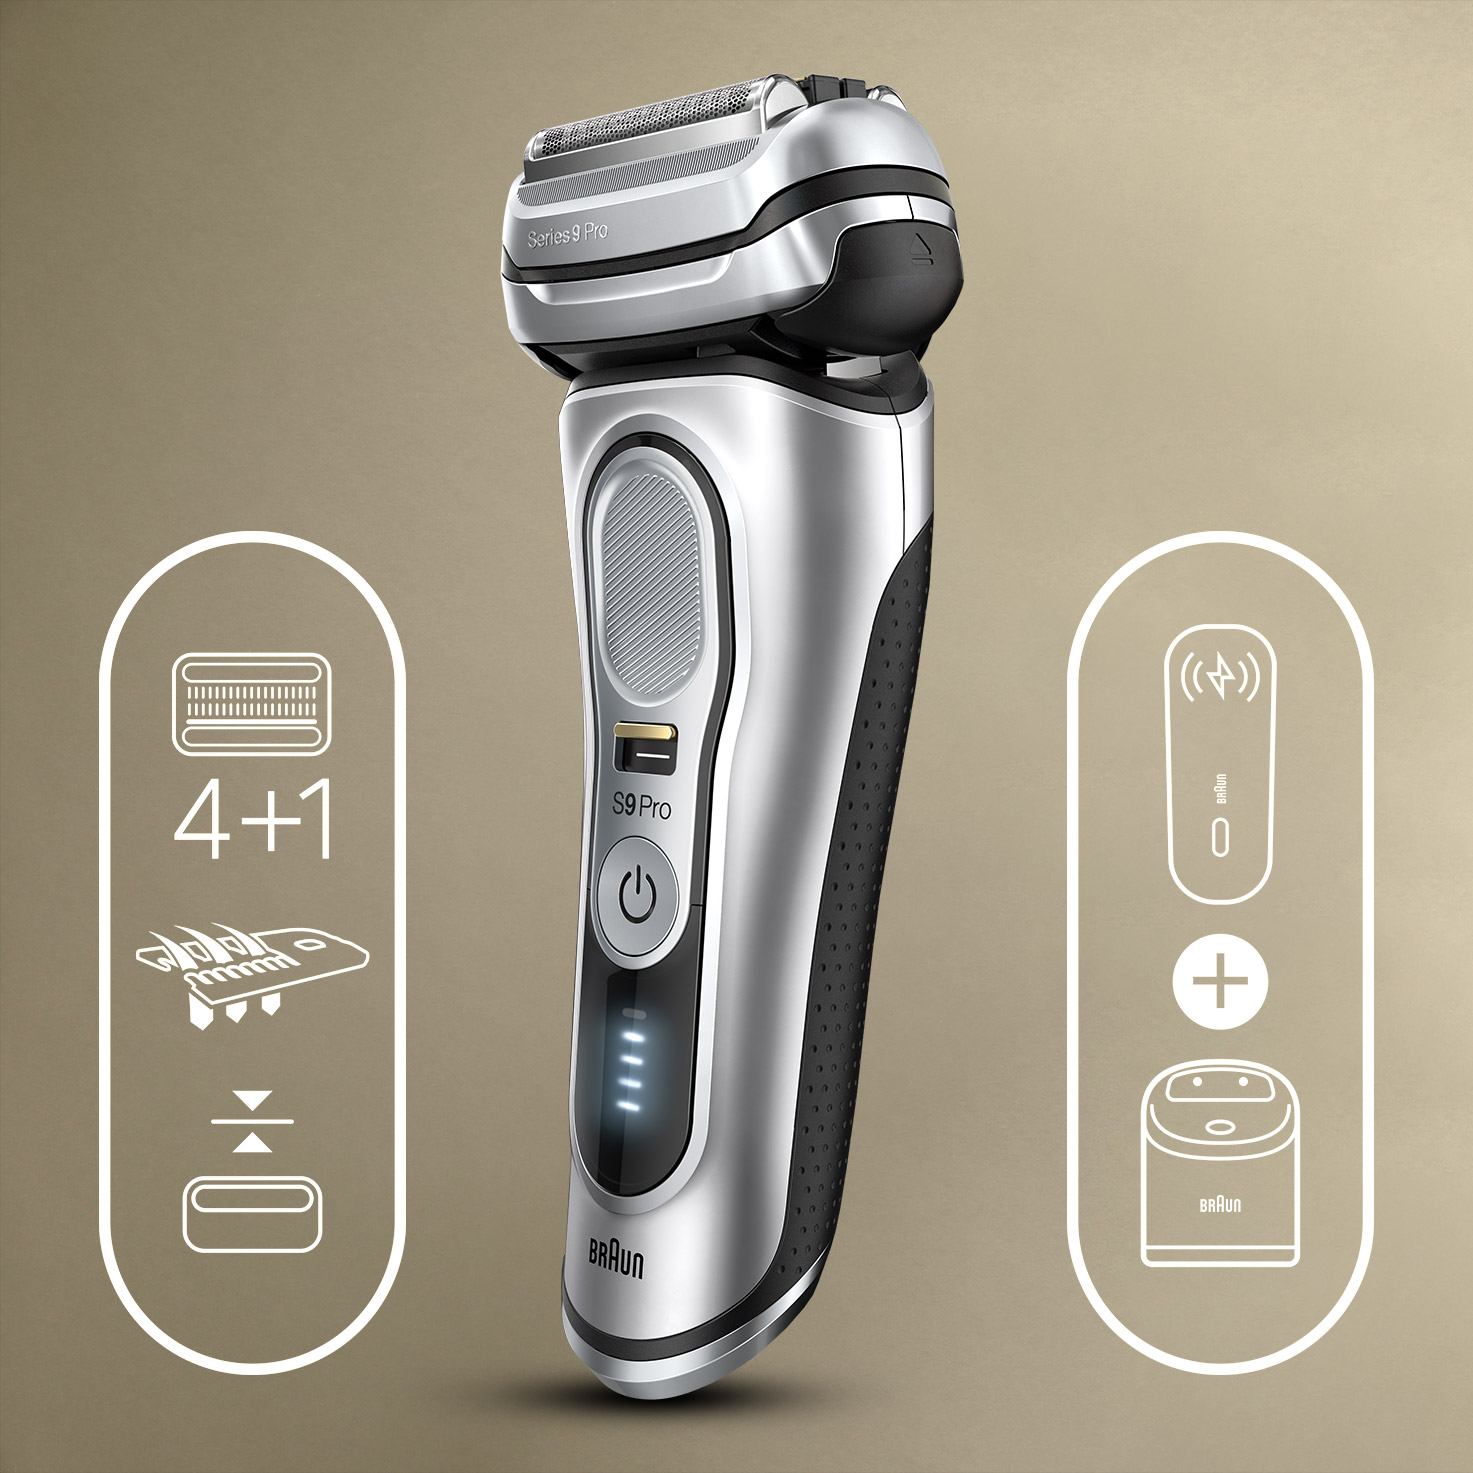 Series 9 Pro 9477cc Wet & Dry shaver with 5-in-1 SmartCare center 